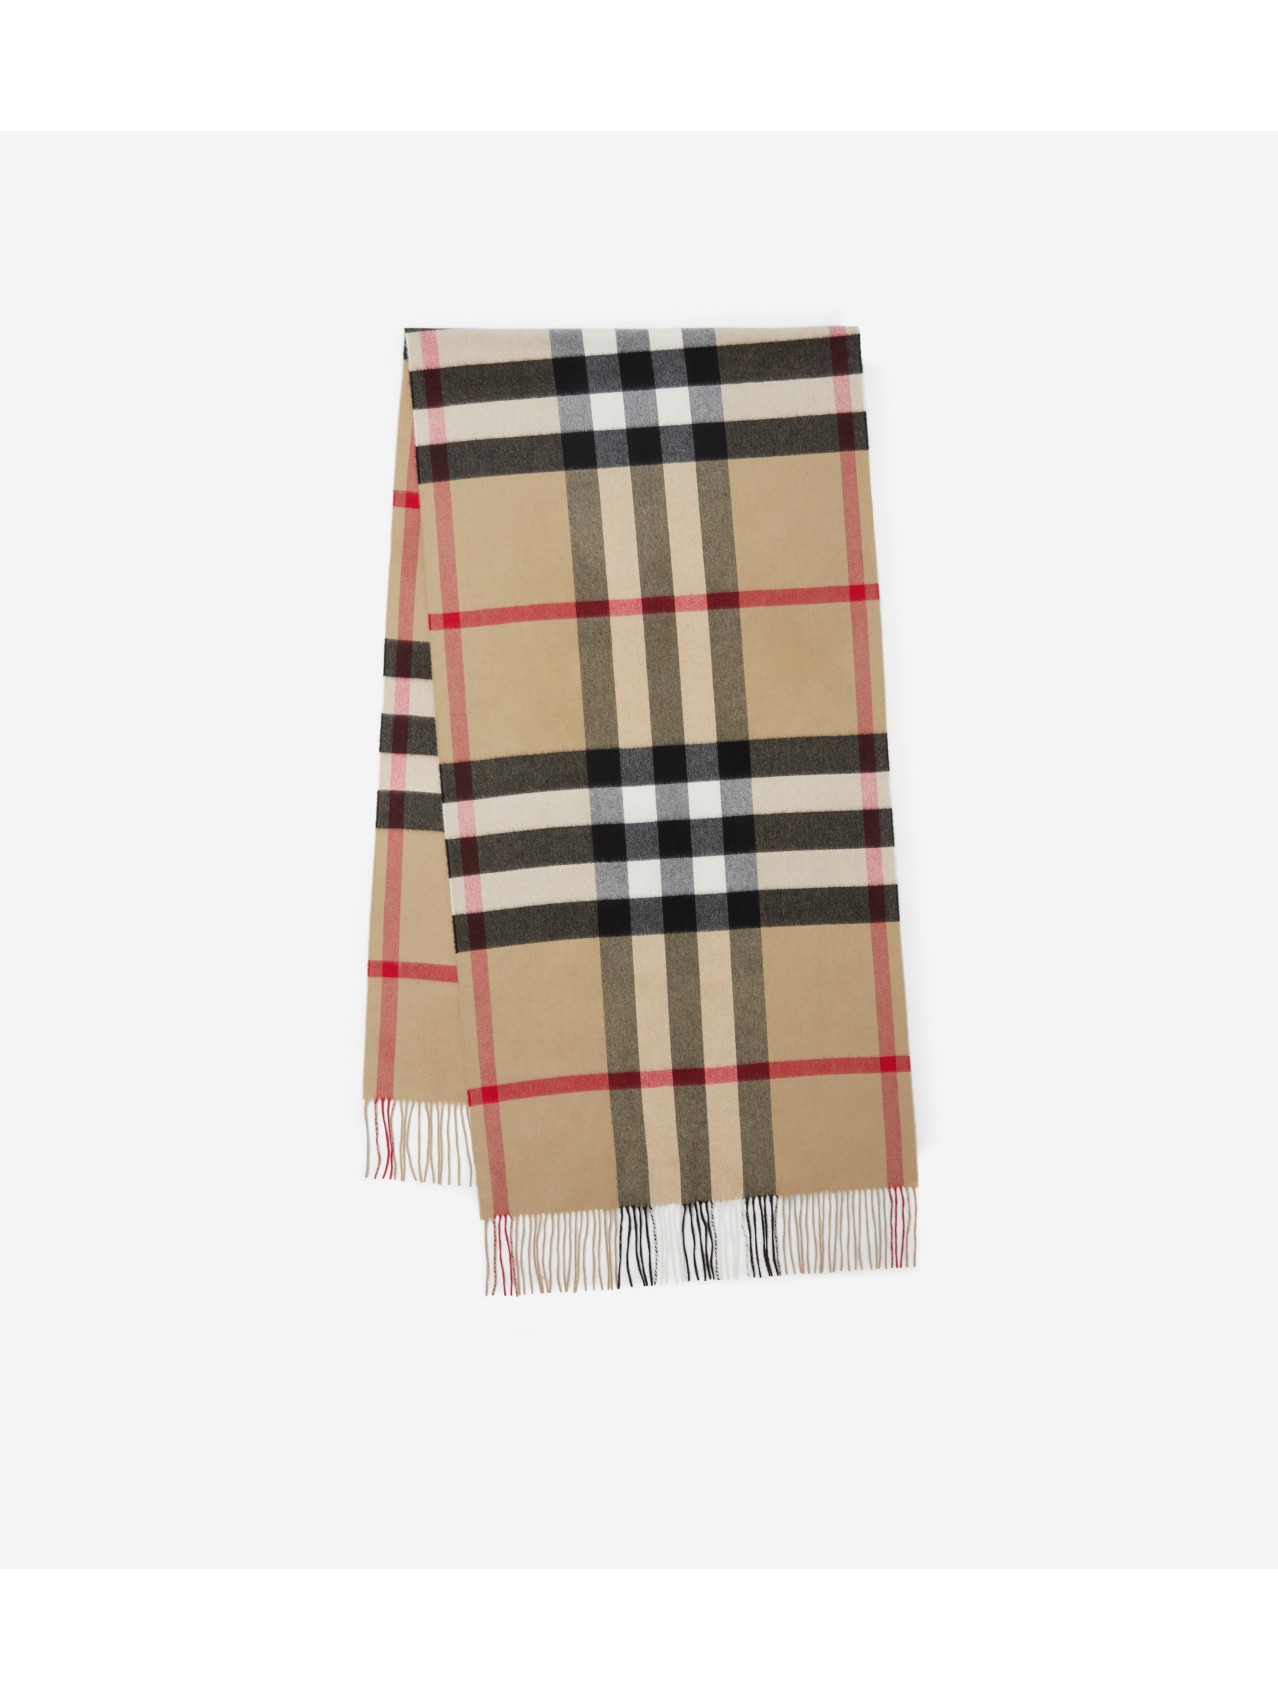 BURBERRY REVERSIBLE CHECK AND LOGO CASHMERE SCARF, 57% OFF